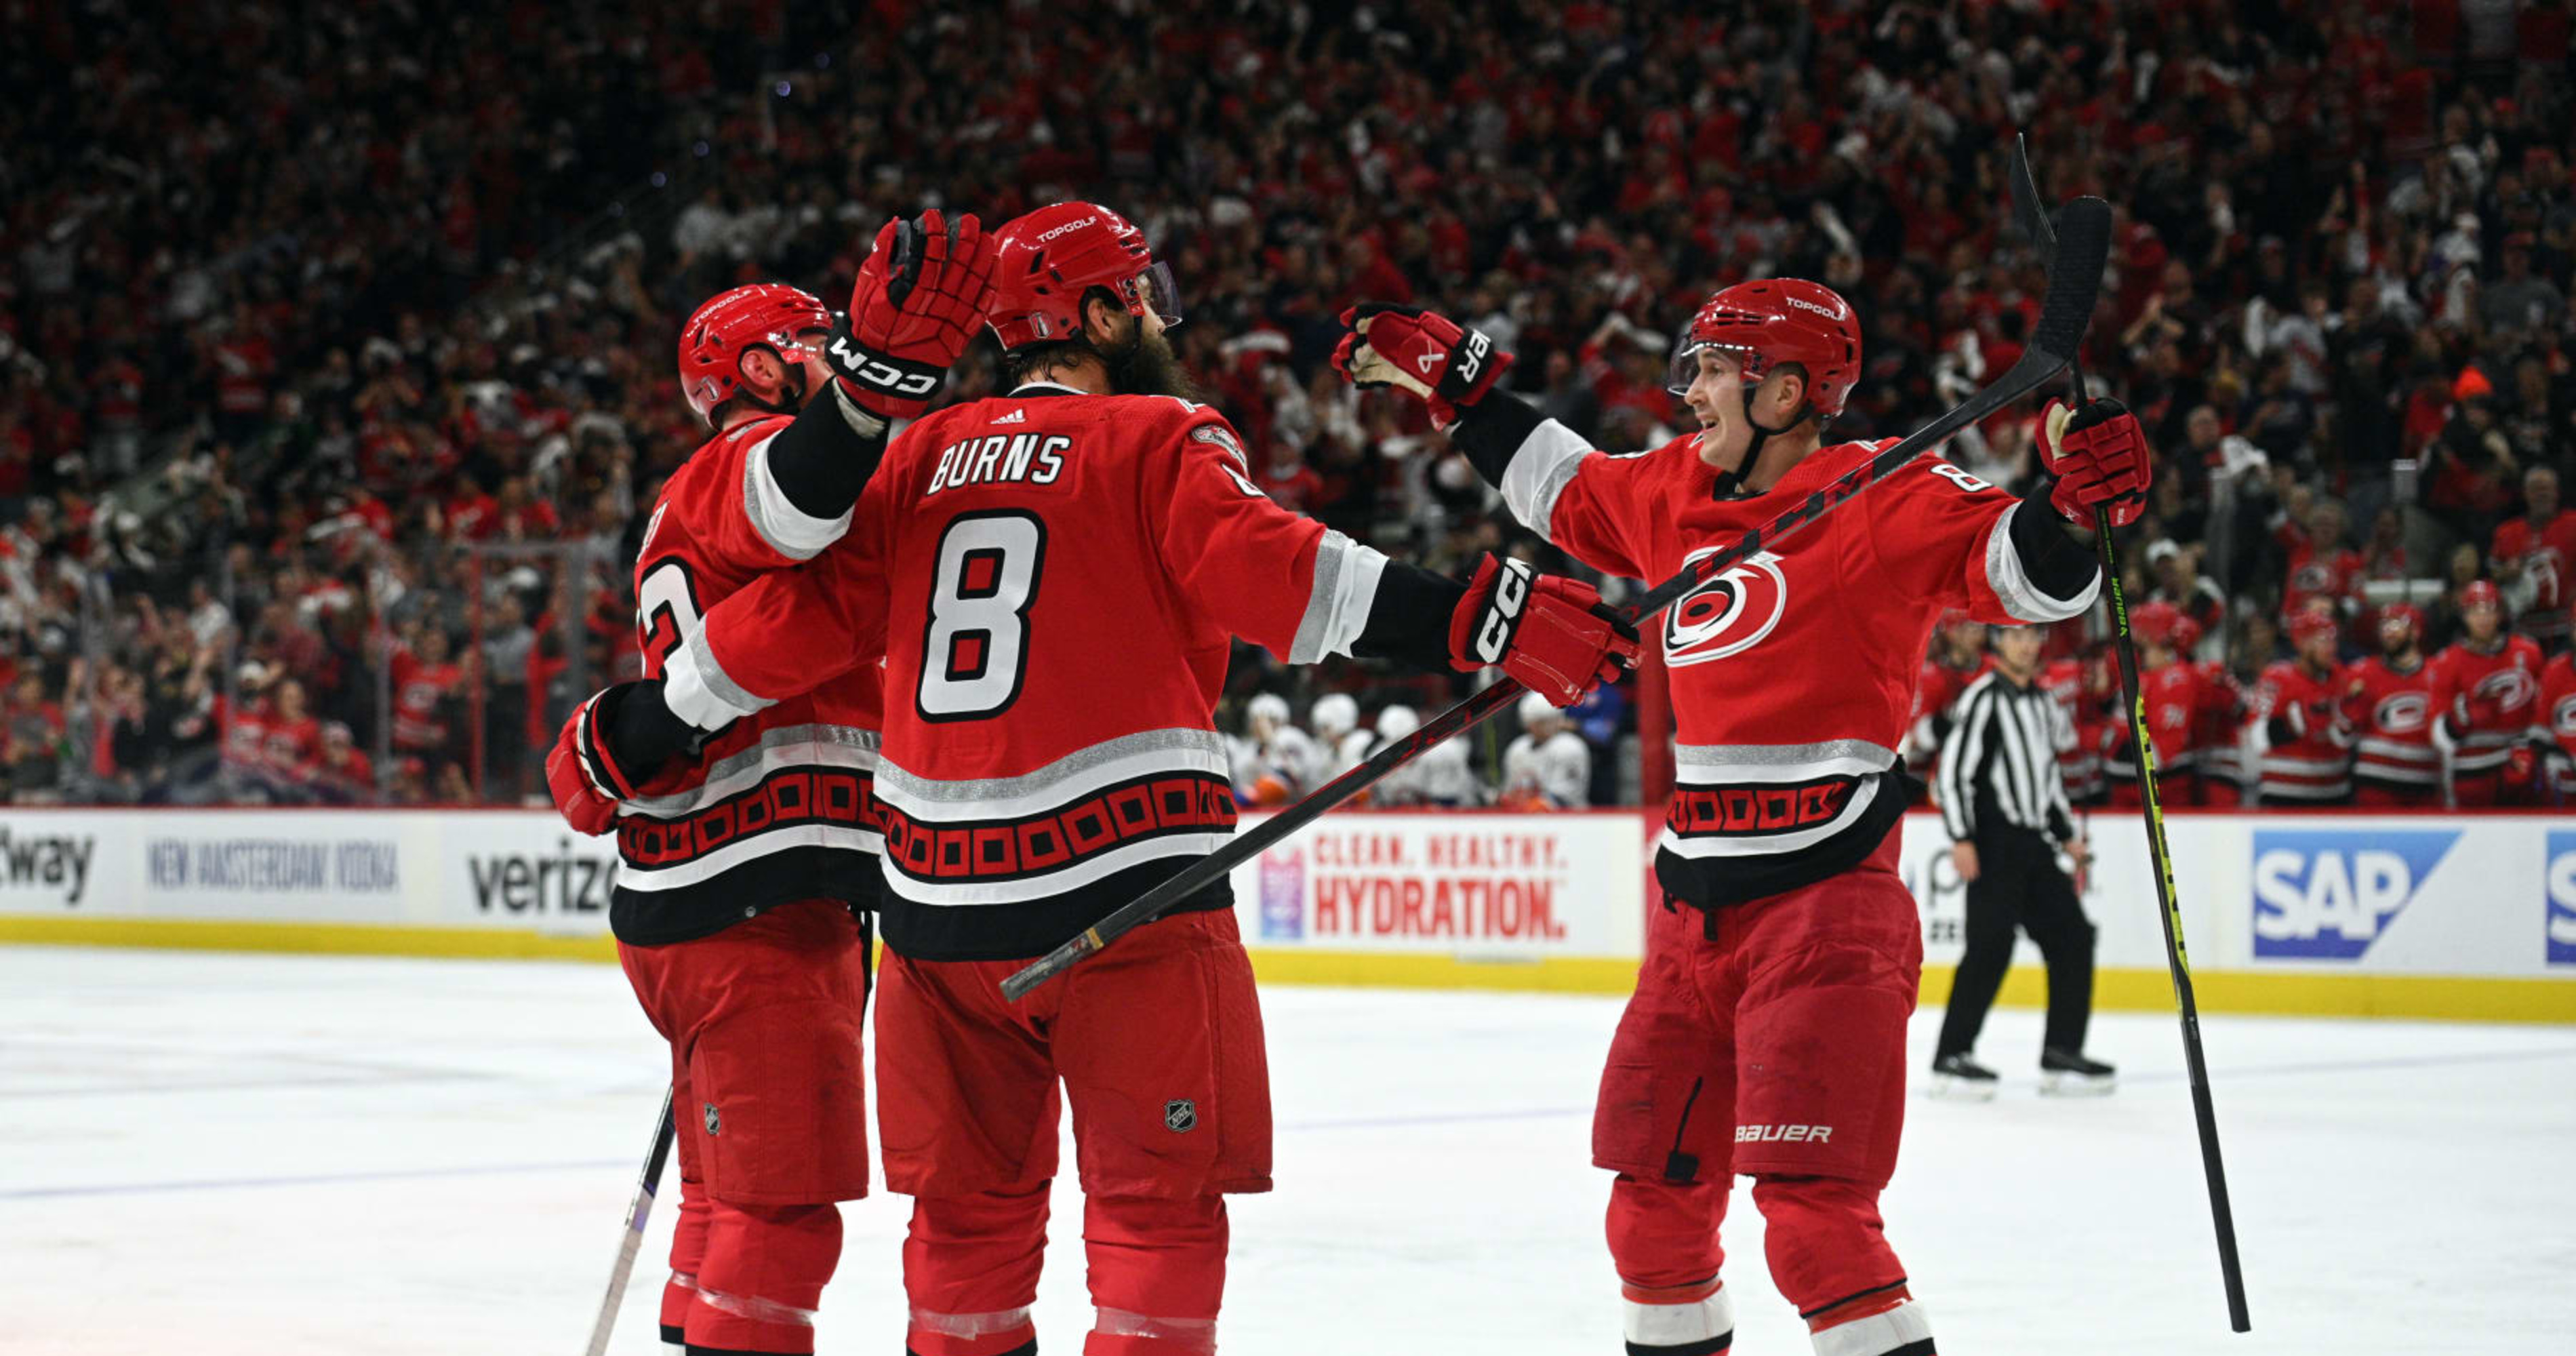 Carolina Hurricanes will hit the ice for NHL Stadium Series in